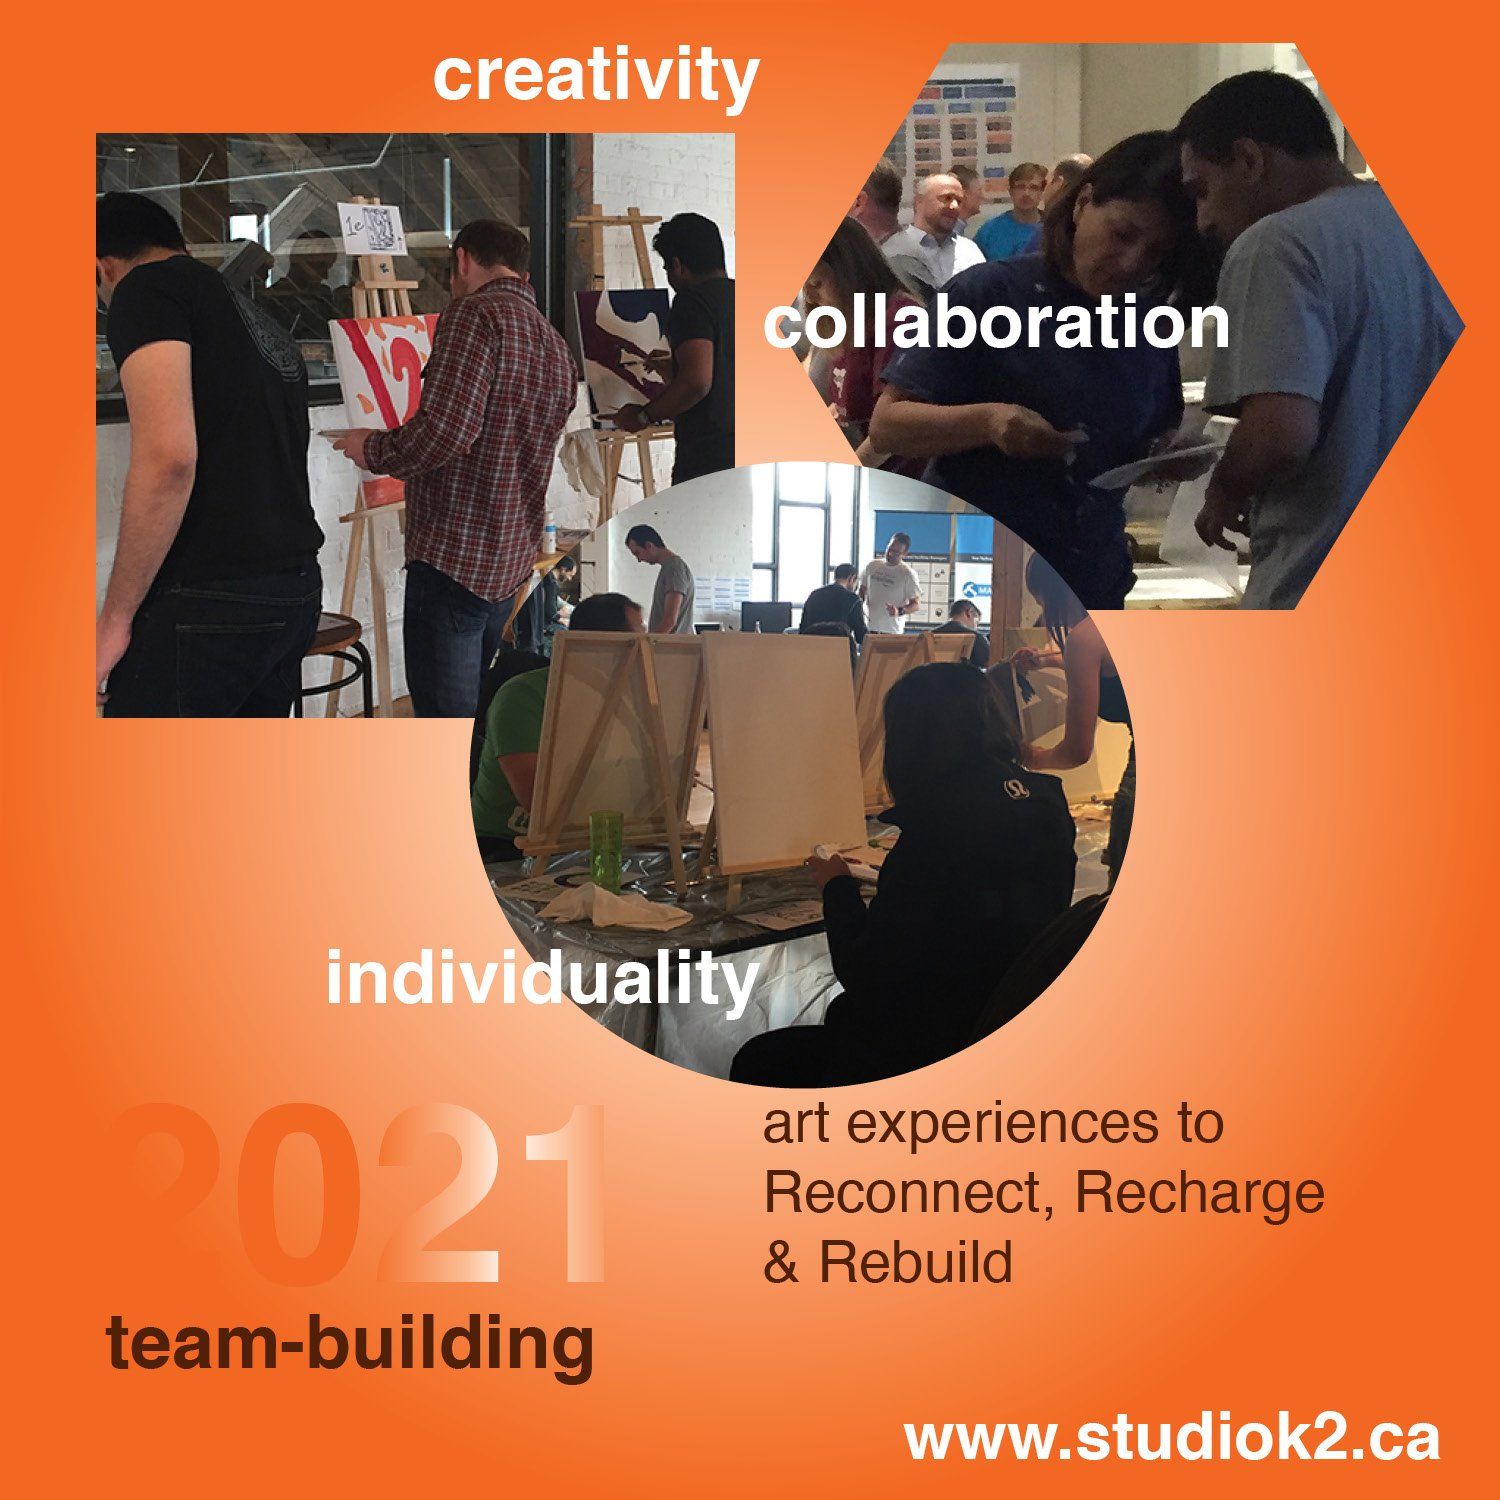 team building, art events, hr strategies, team culture, creativity, collaboration,  individuality, corporate vision